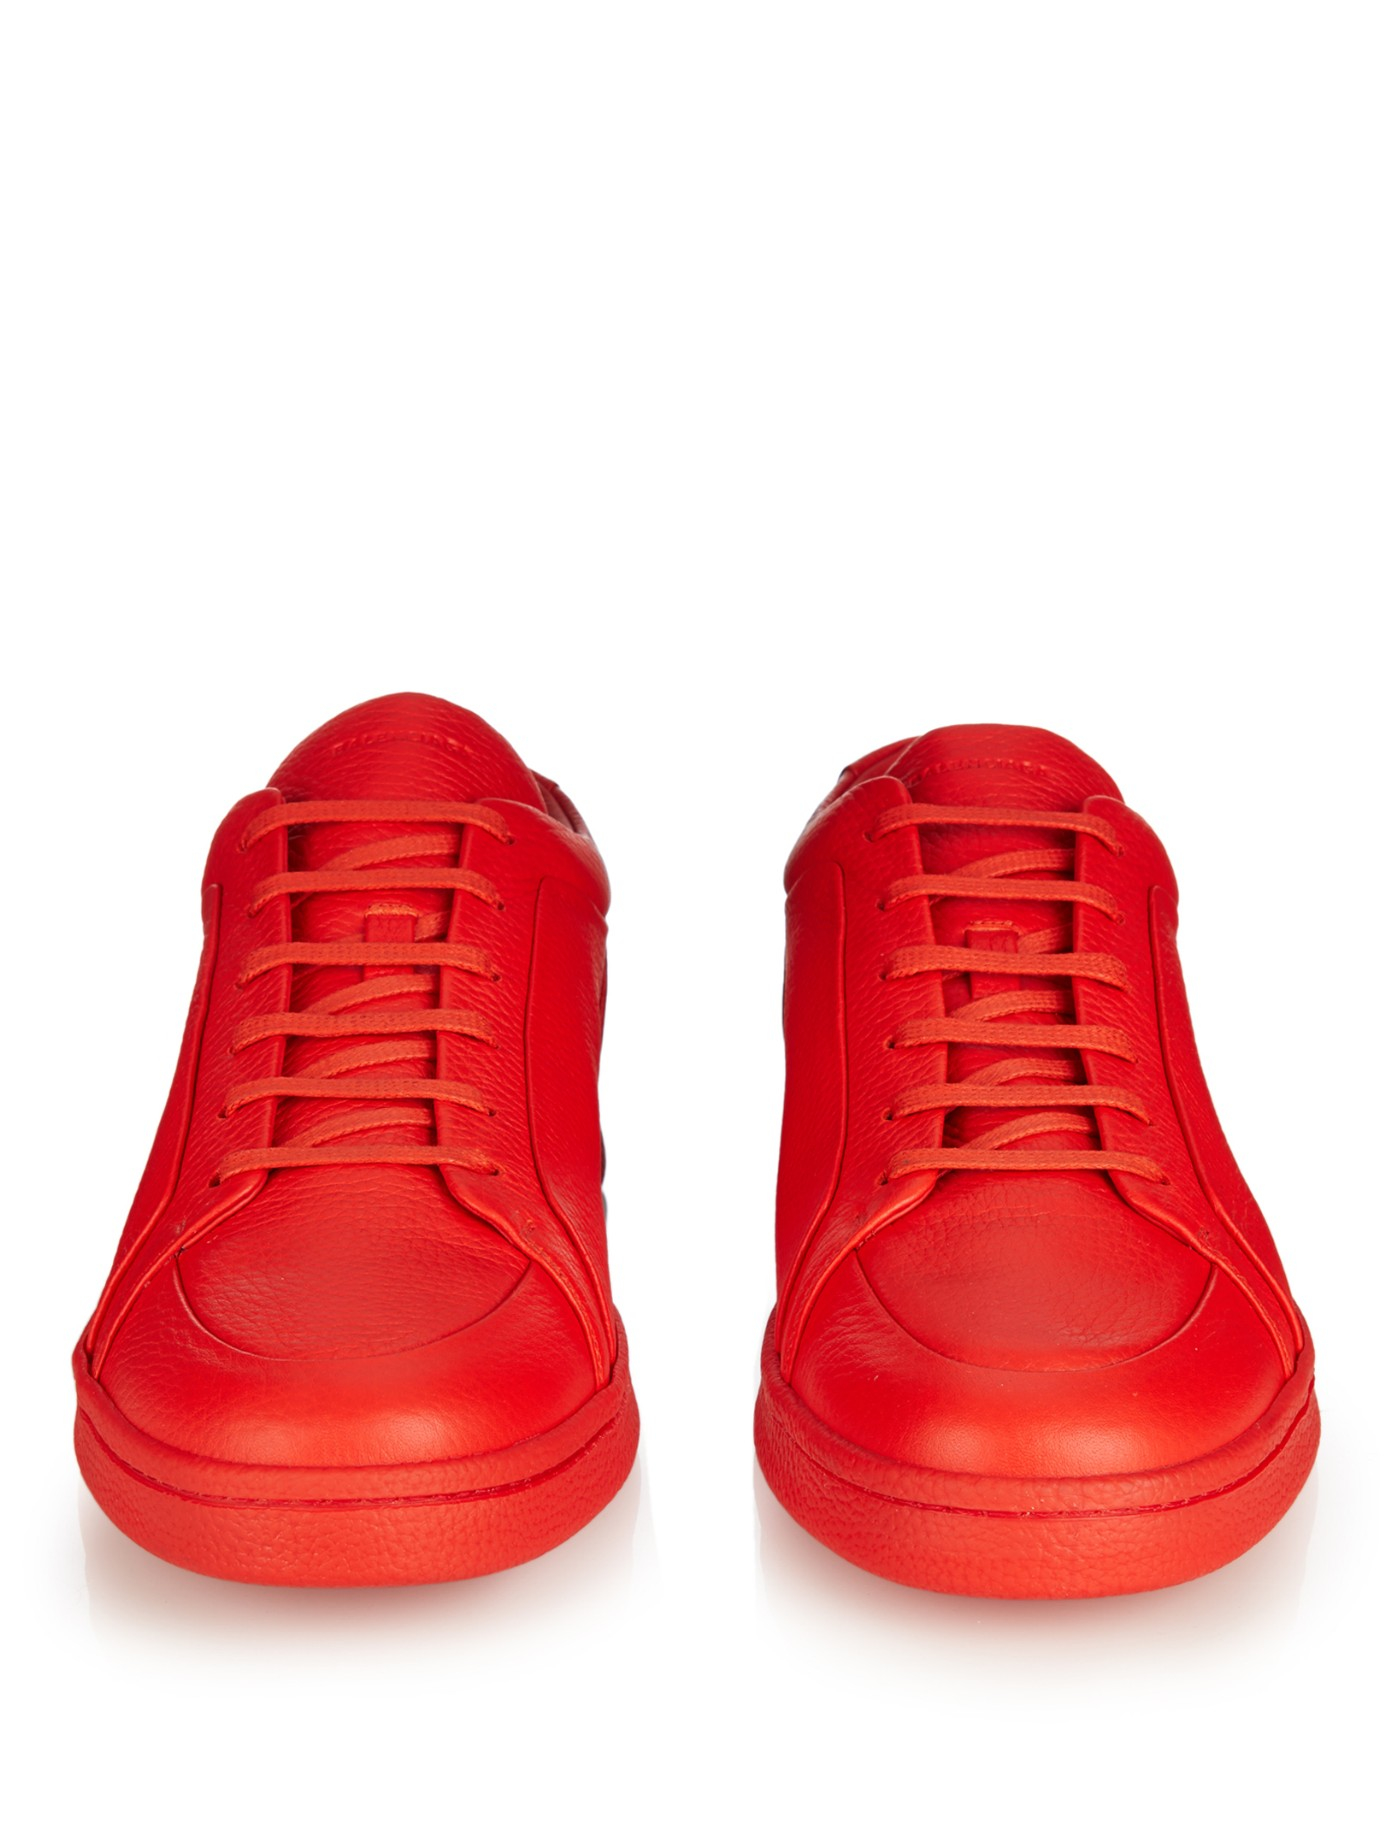 Balenciaga Urban Low-top Leather Trainers in Red for Men - Lyst